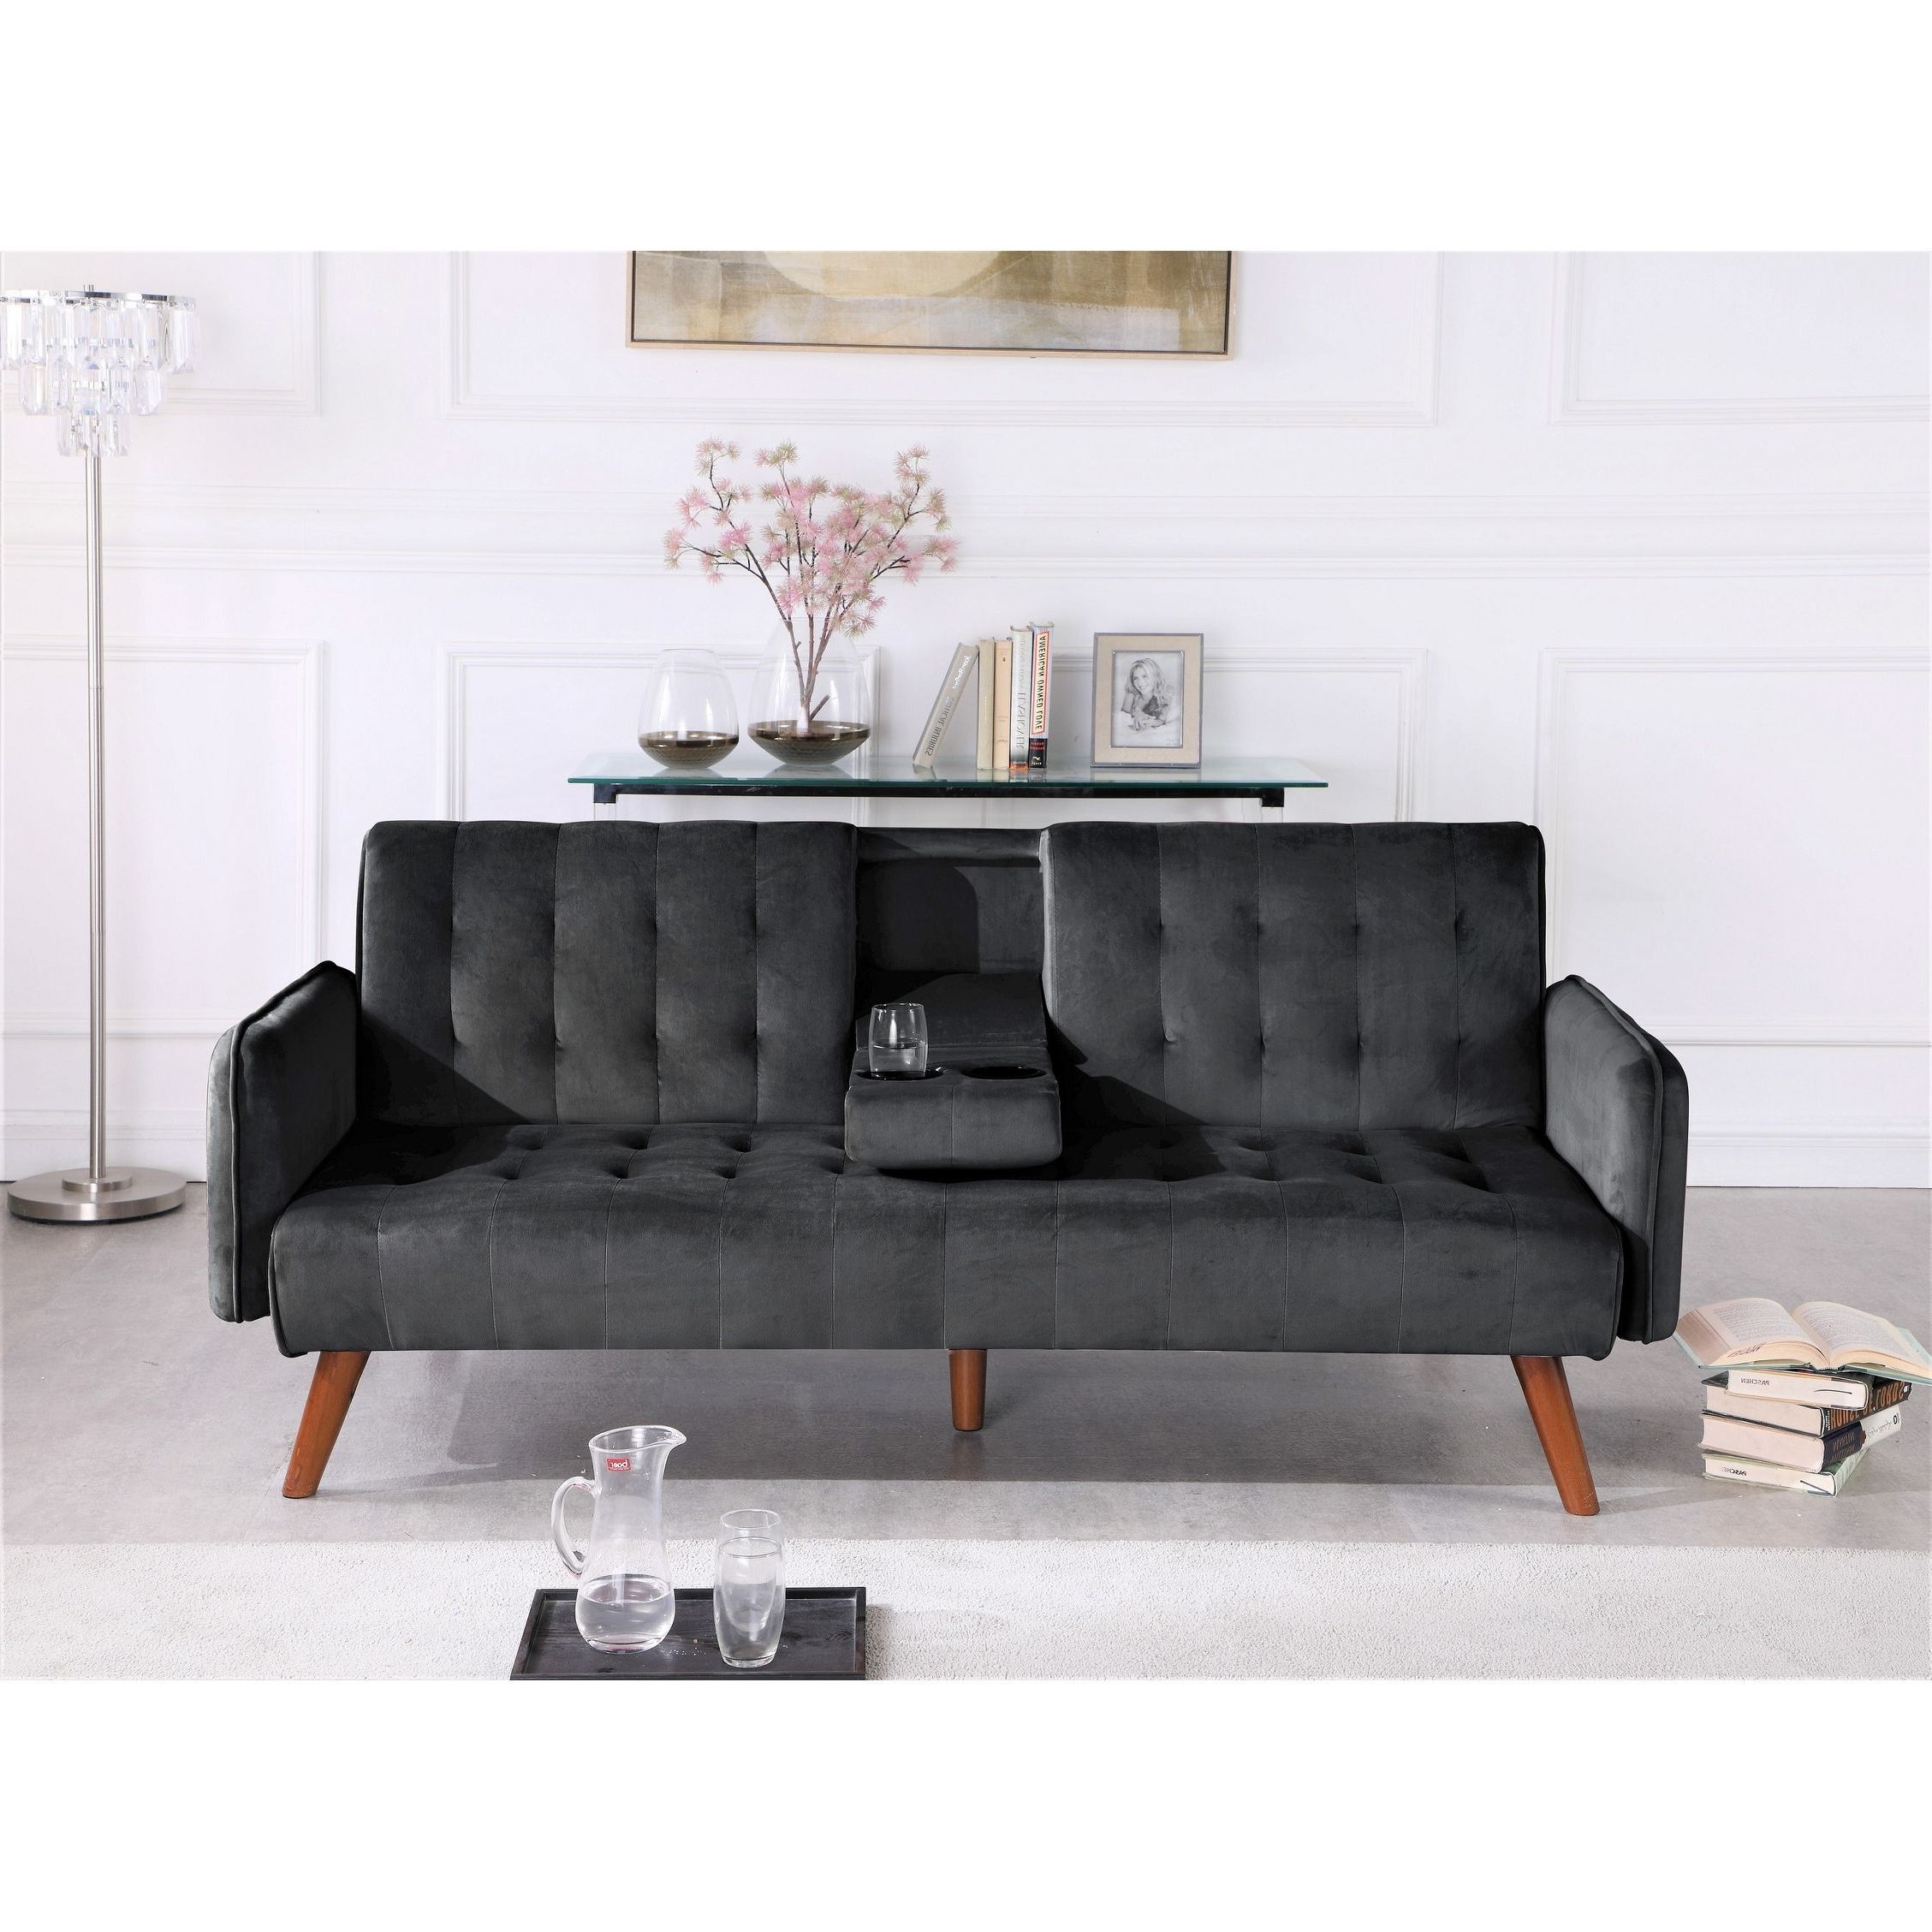 Us Pride Tufted Convertible Velvet Sofa Bed With Cup Holder – Overstock Regarding Well Liked 66" Convertible Velvet Sofa Beds (View 10 of 15)